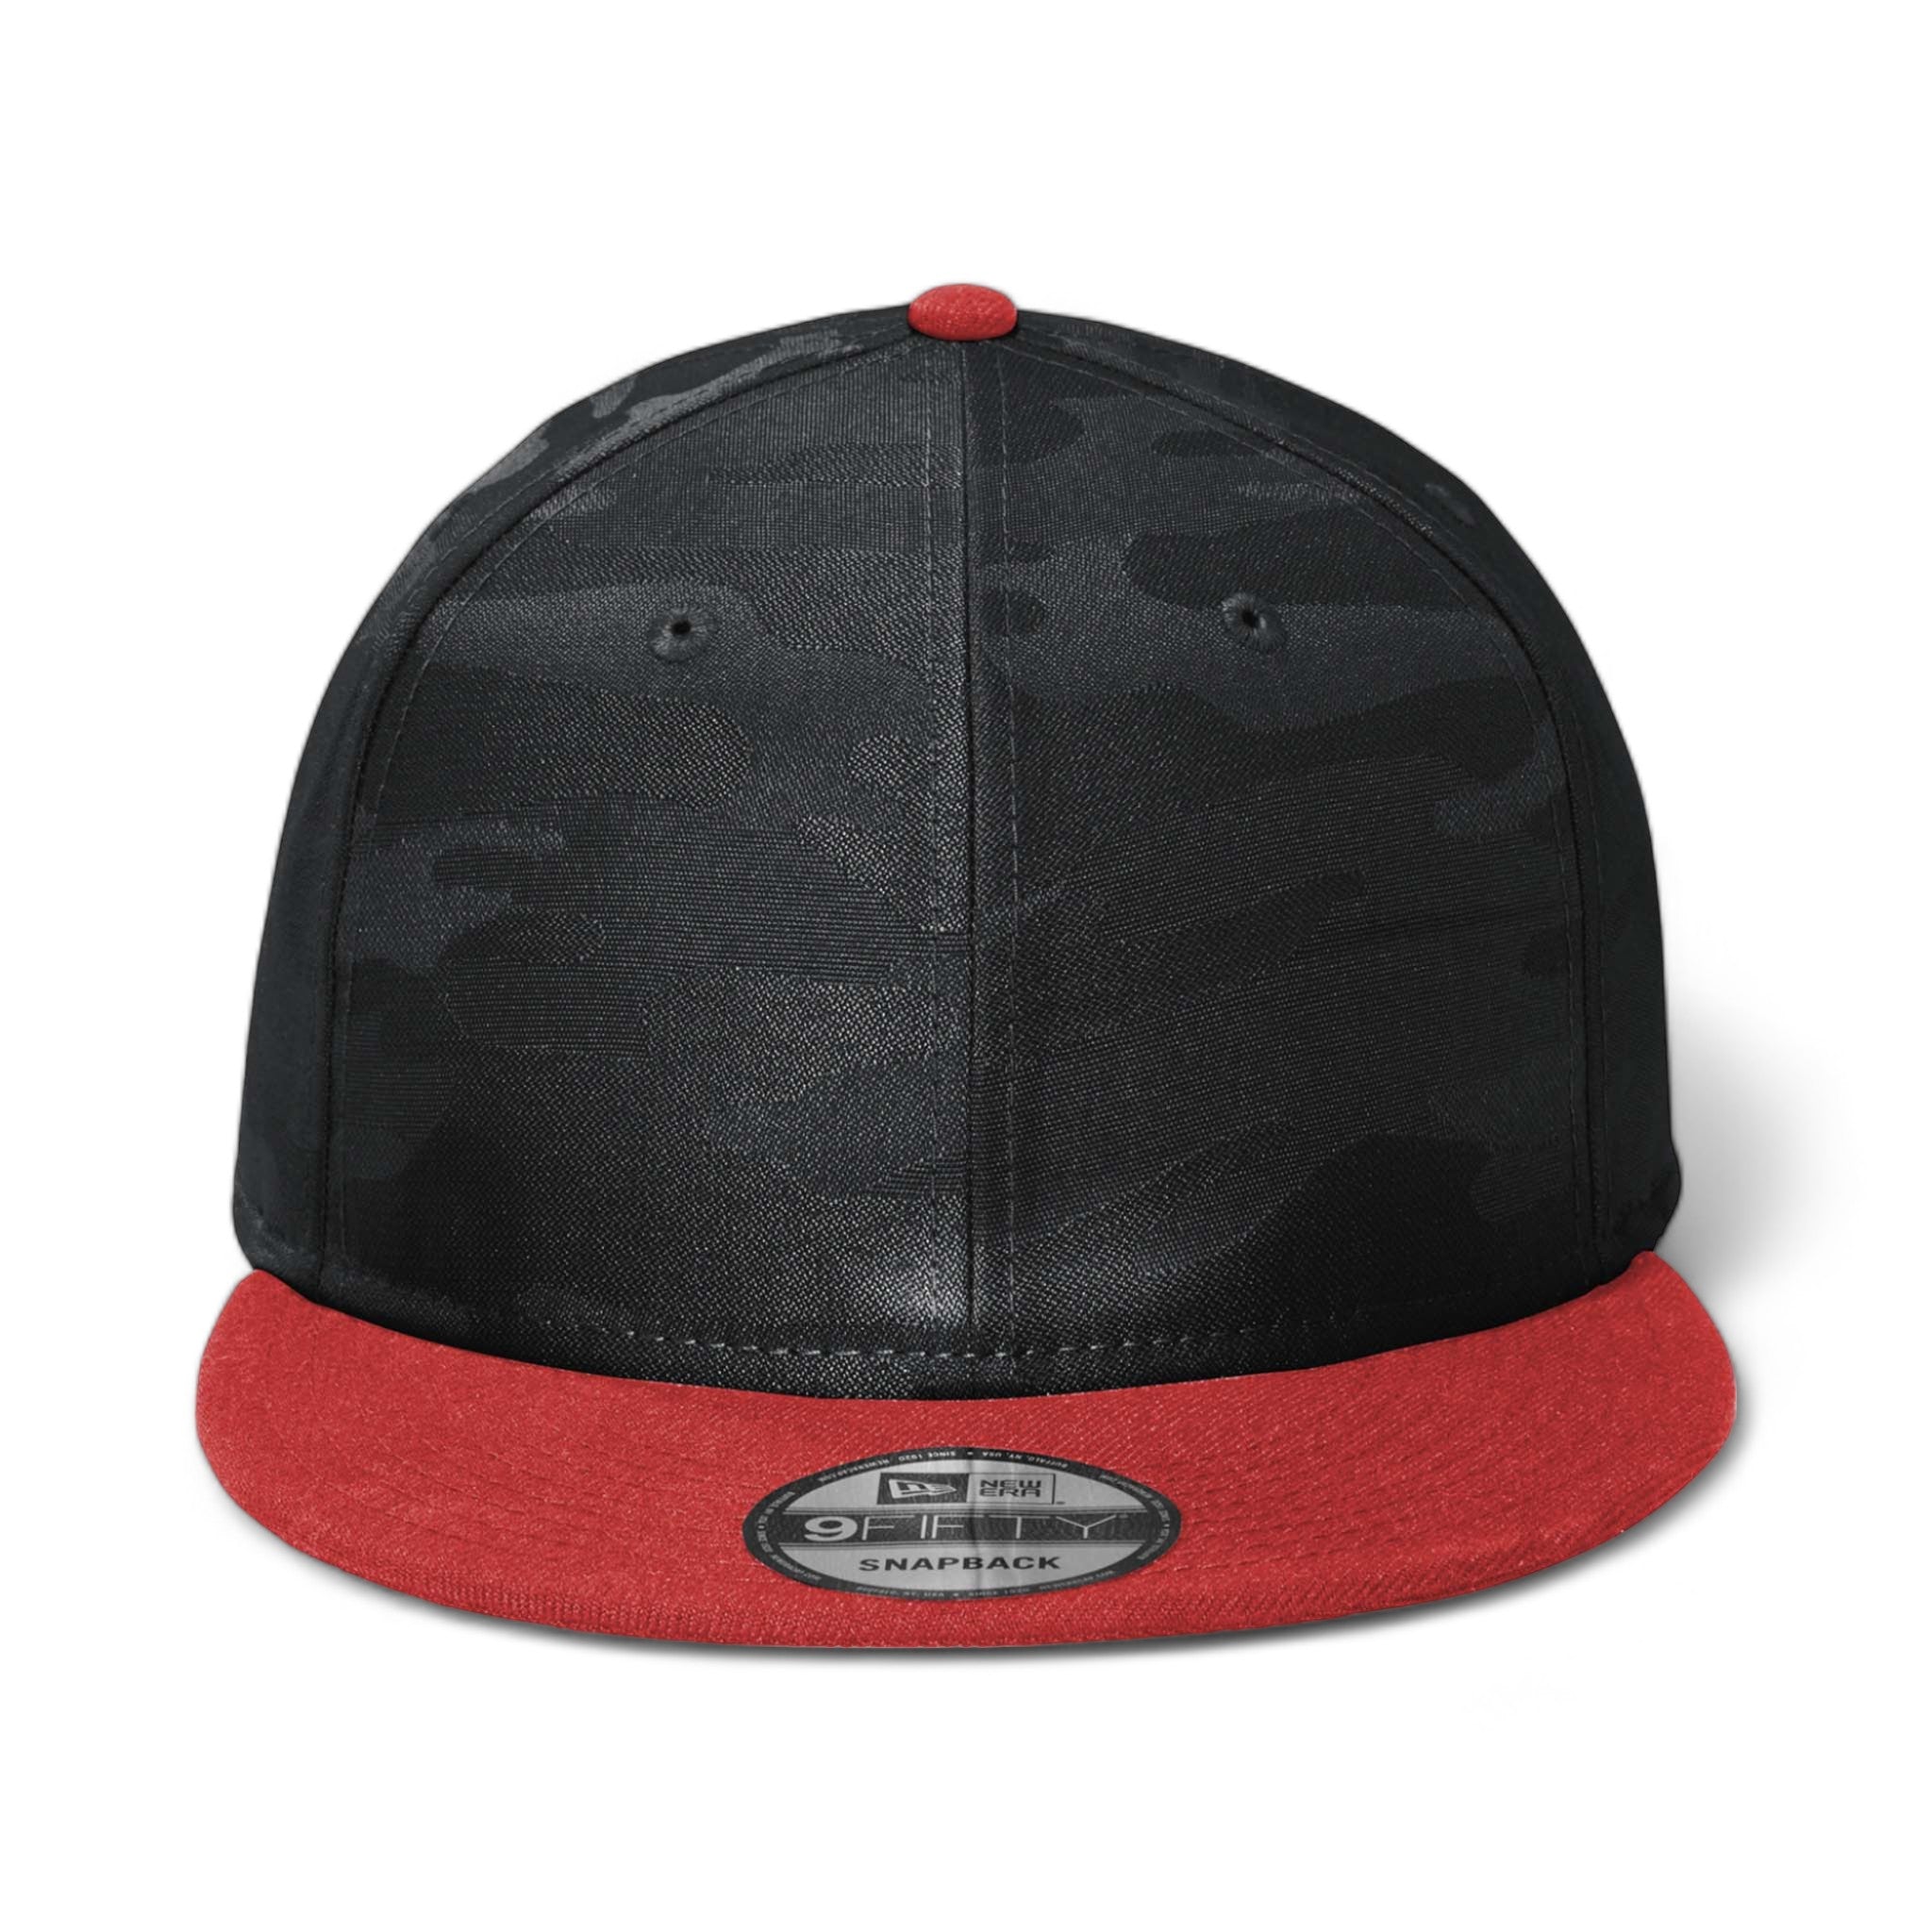 Front view of New Era NE407 custom hat in scarlet and black camo